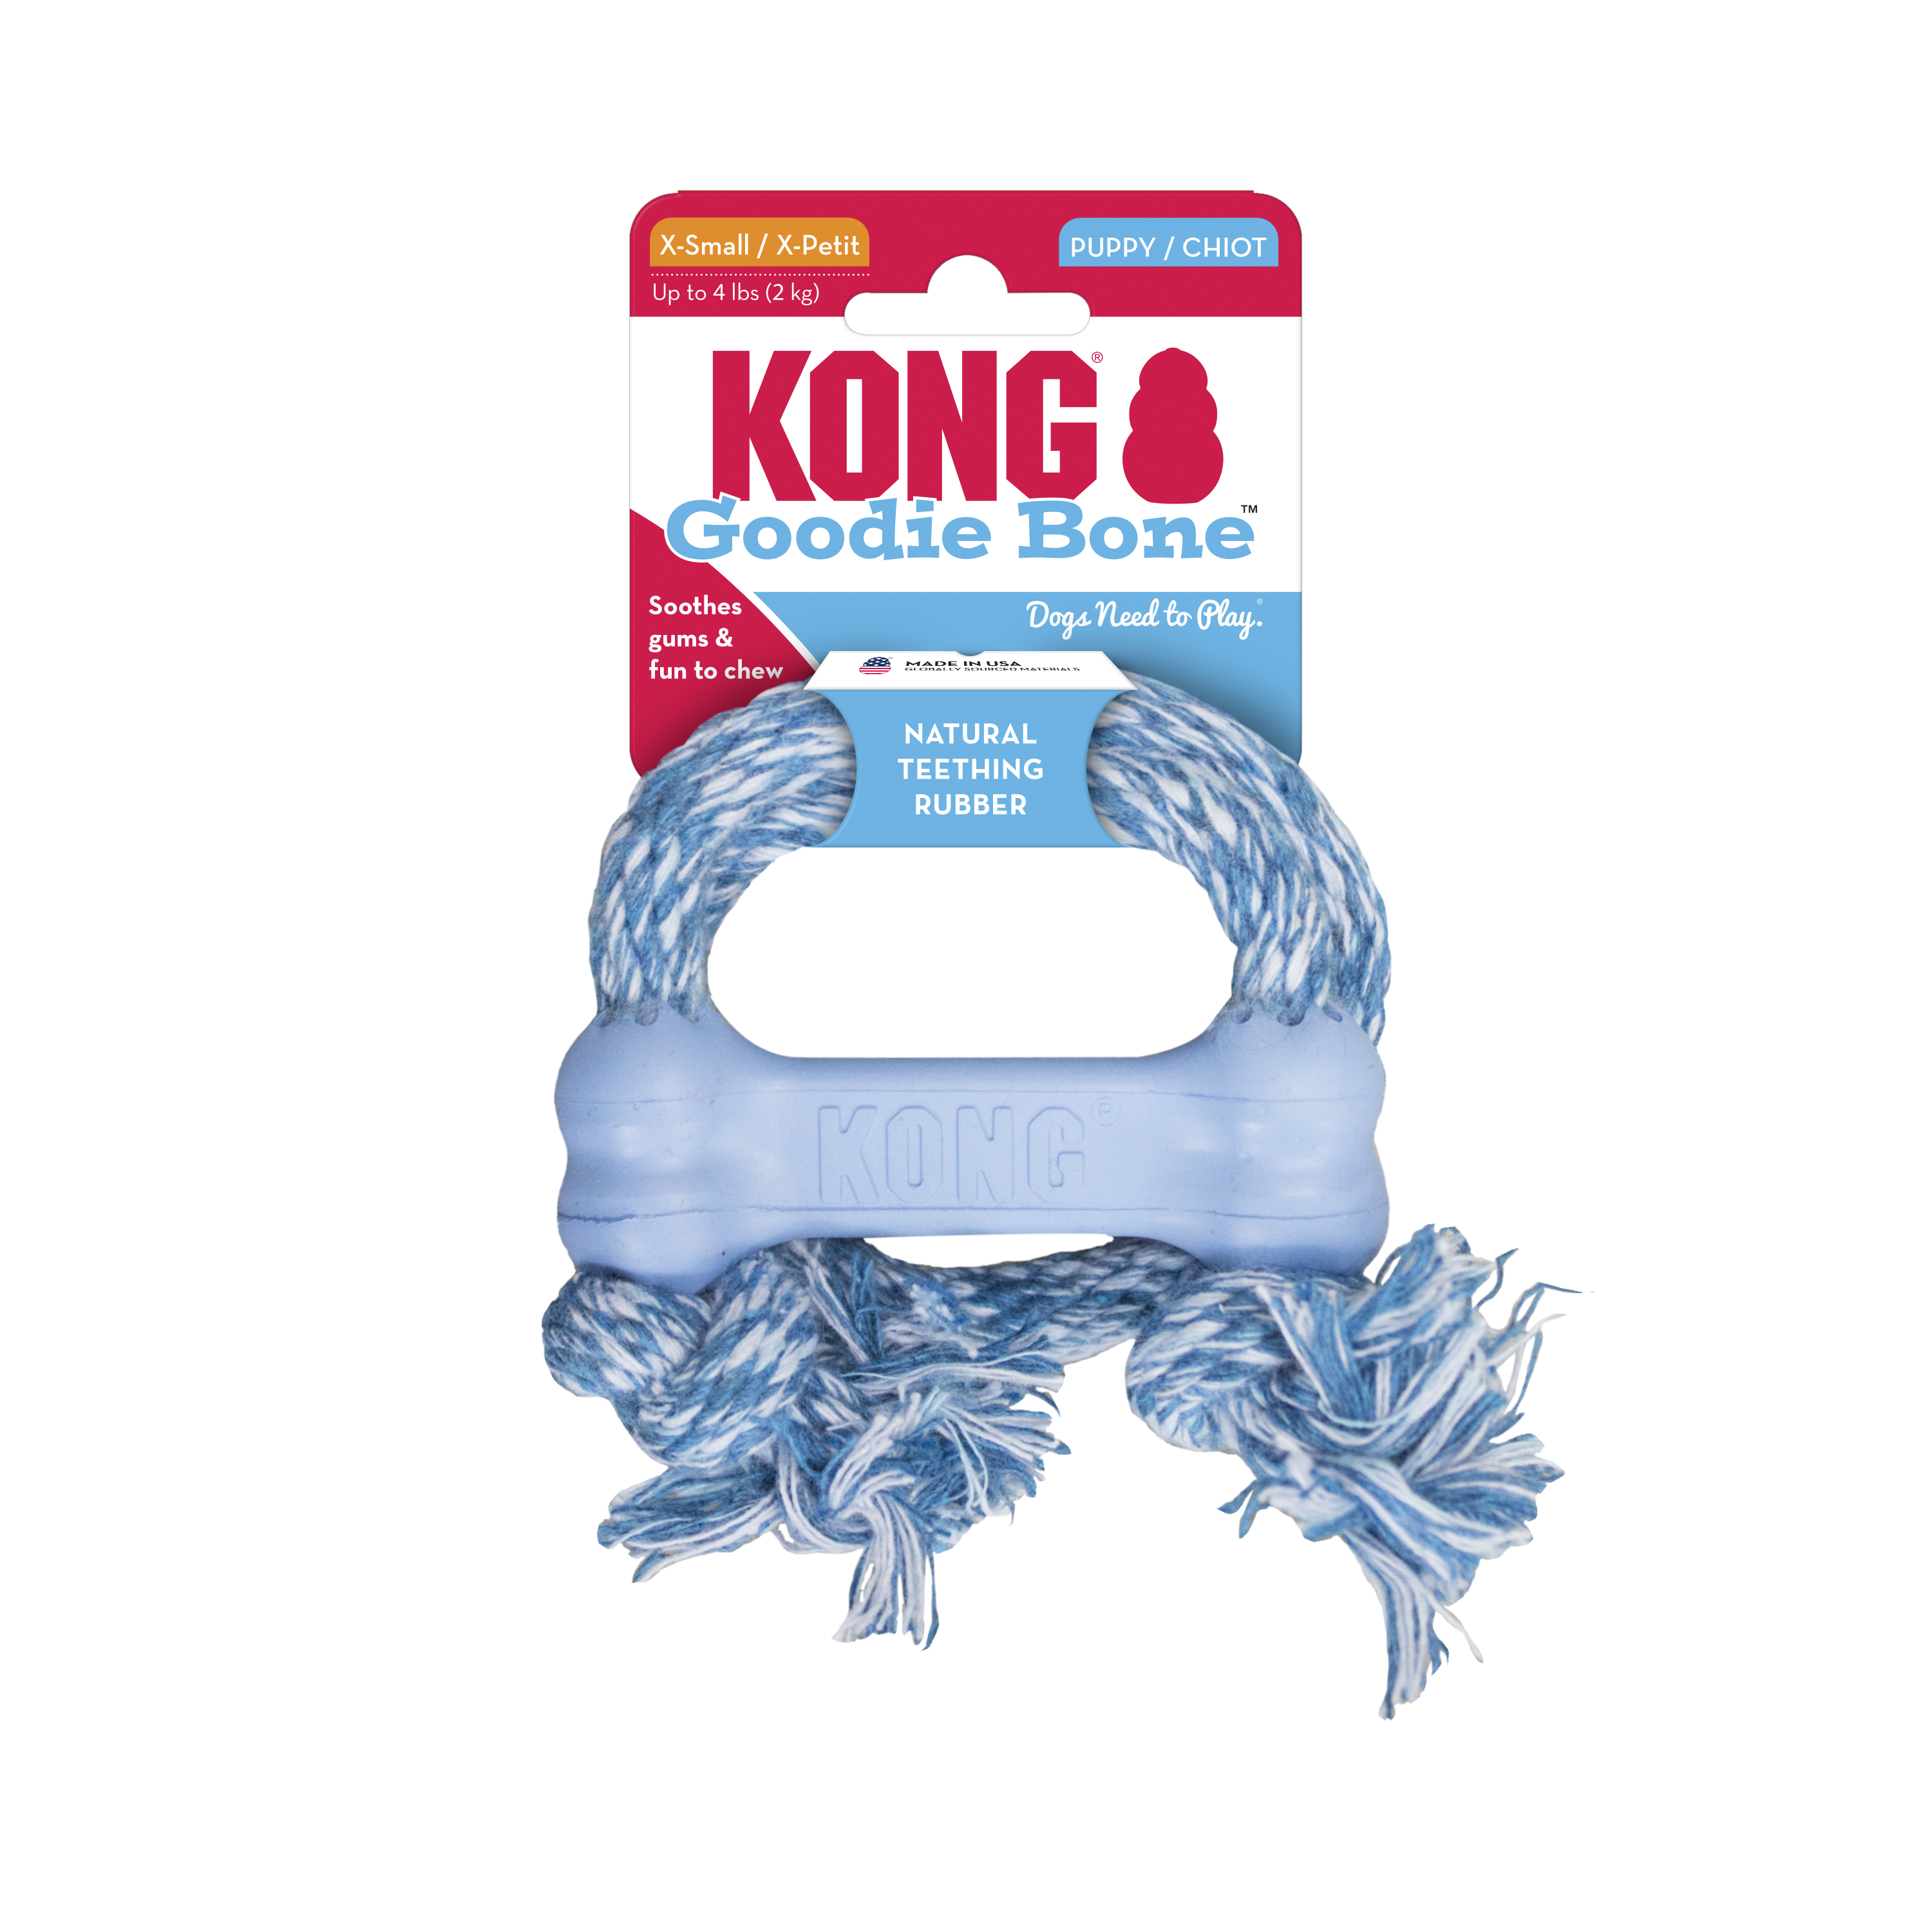 KONG Puppy Goodie Bone w/Rope onpack product image